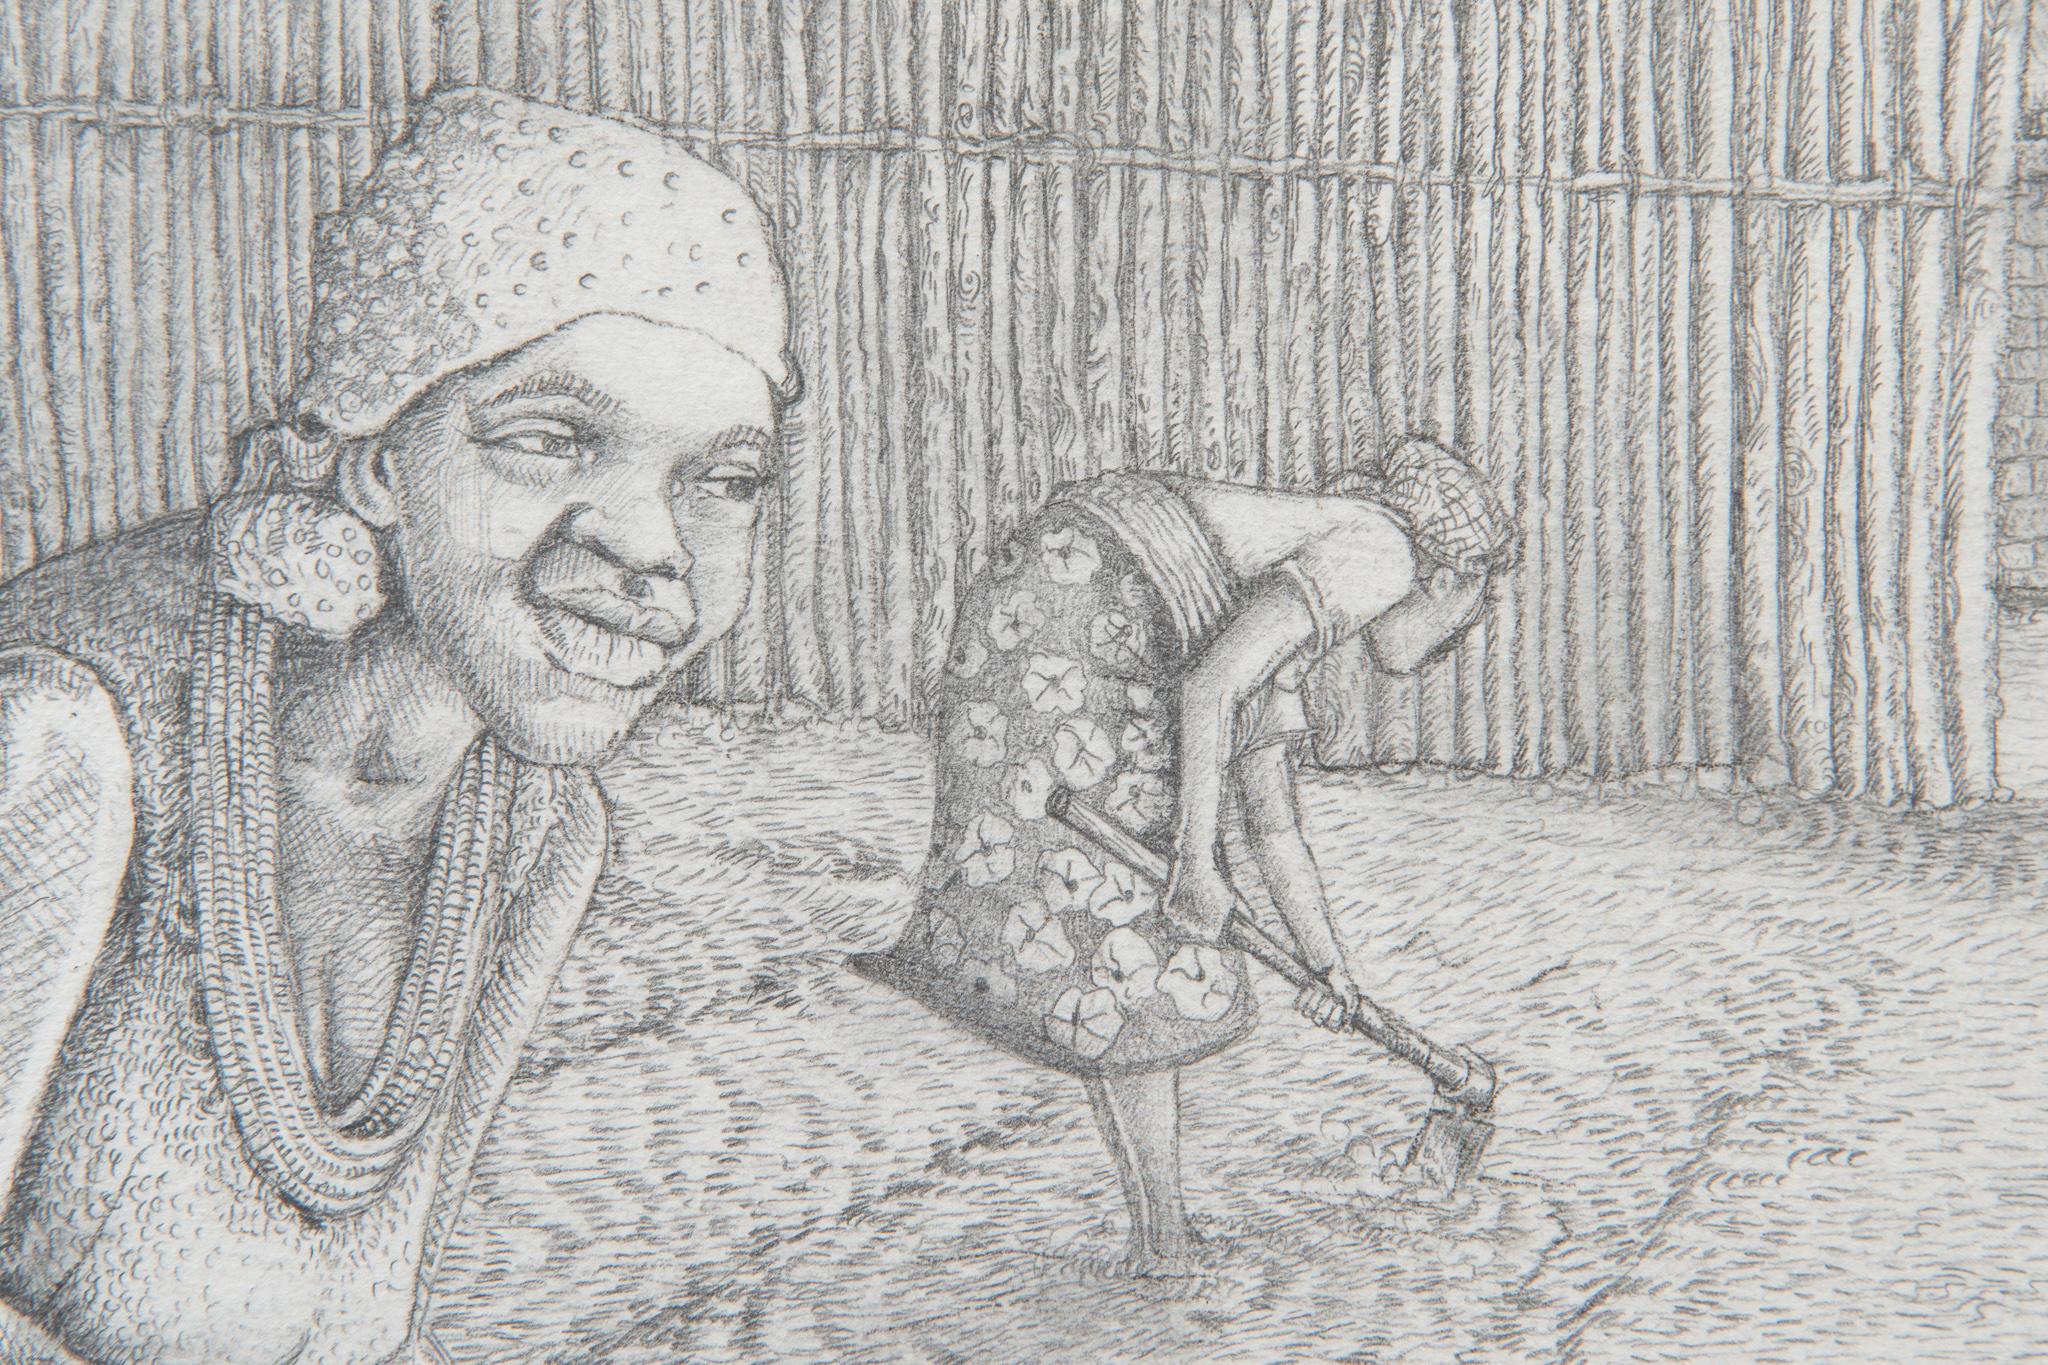 Tulongeni, ca. 2019, Pencil on fabriano paper

Petrus Amuthenu was born in Swakopmund and grew up in northern Namibia in Uukwaludhi. In 2002 a chance encounter with the late artist Samuel Mbingilo at the Katutura Community Art Centre gave Amuthenu